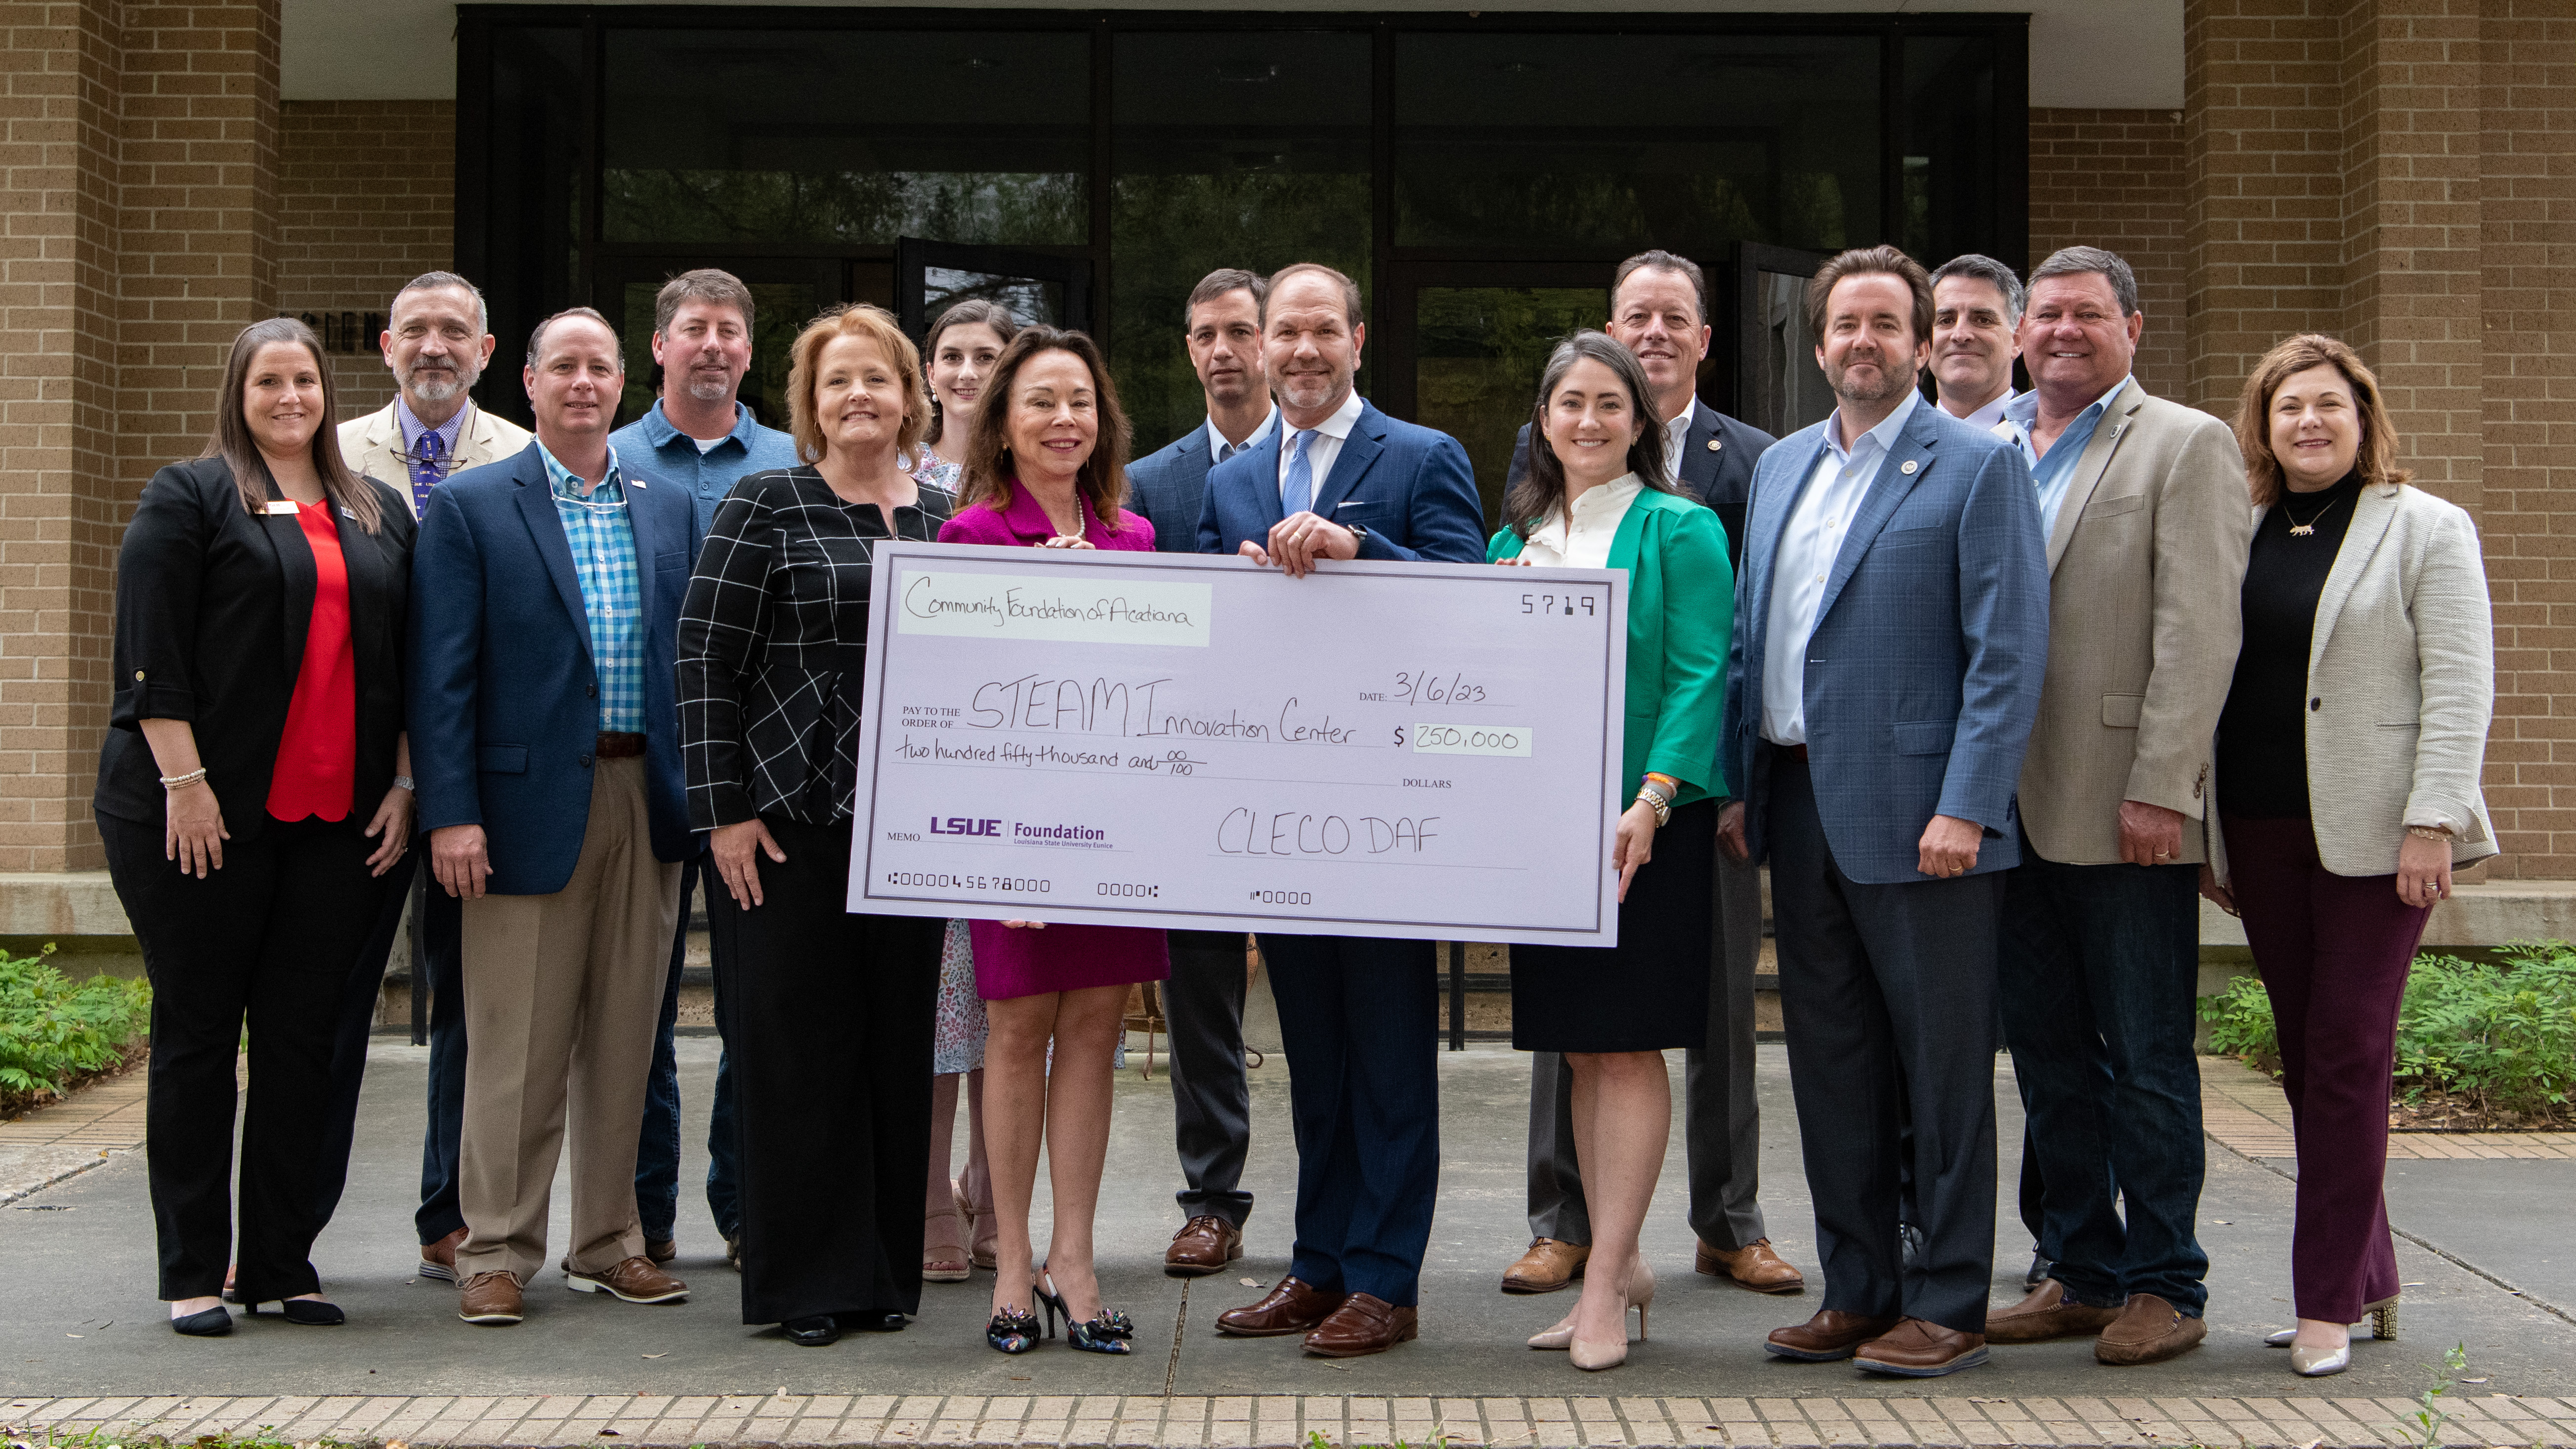 CLECO Makes $250K Gift Towards LSUE STEAM Innovation Center